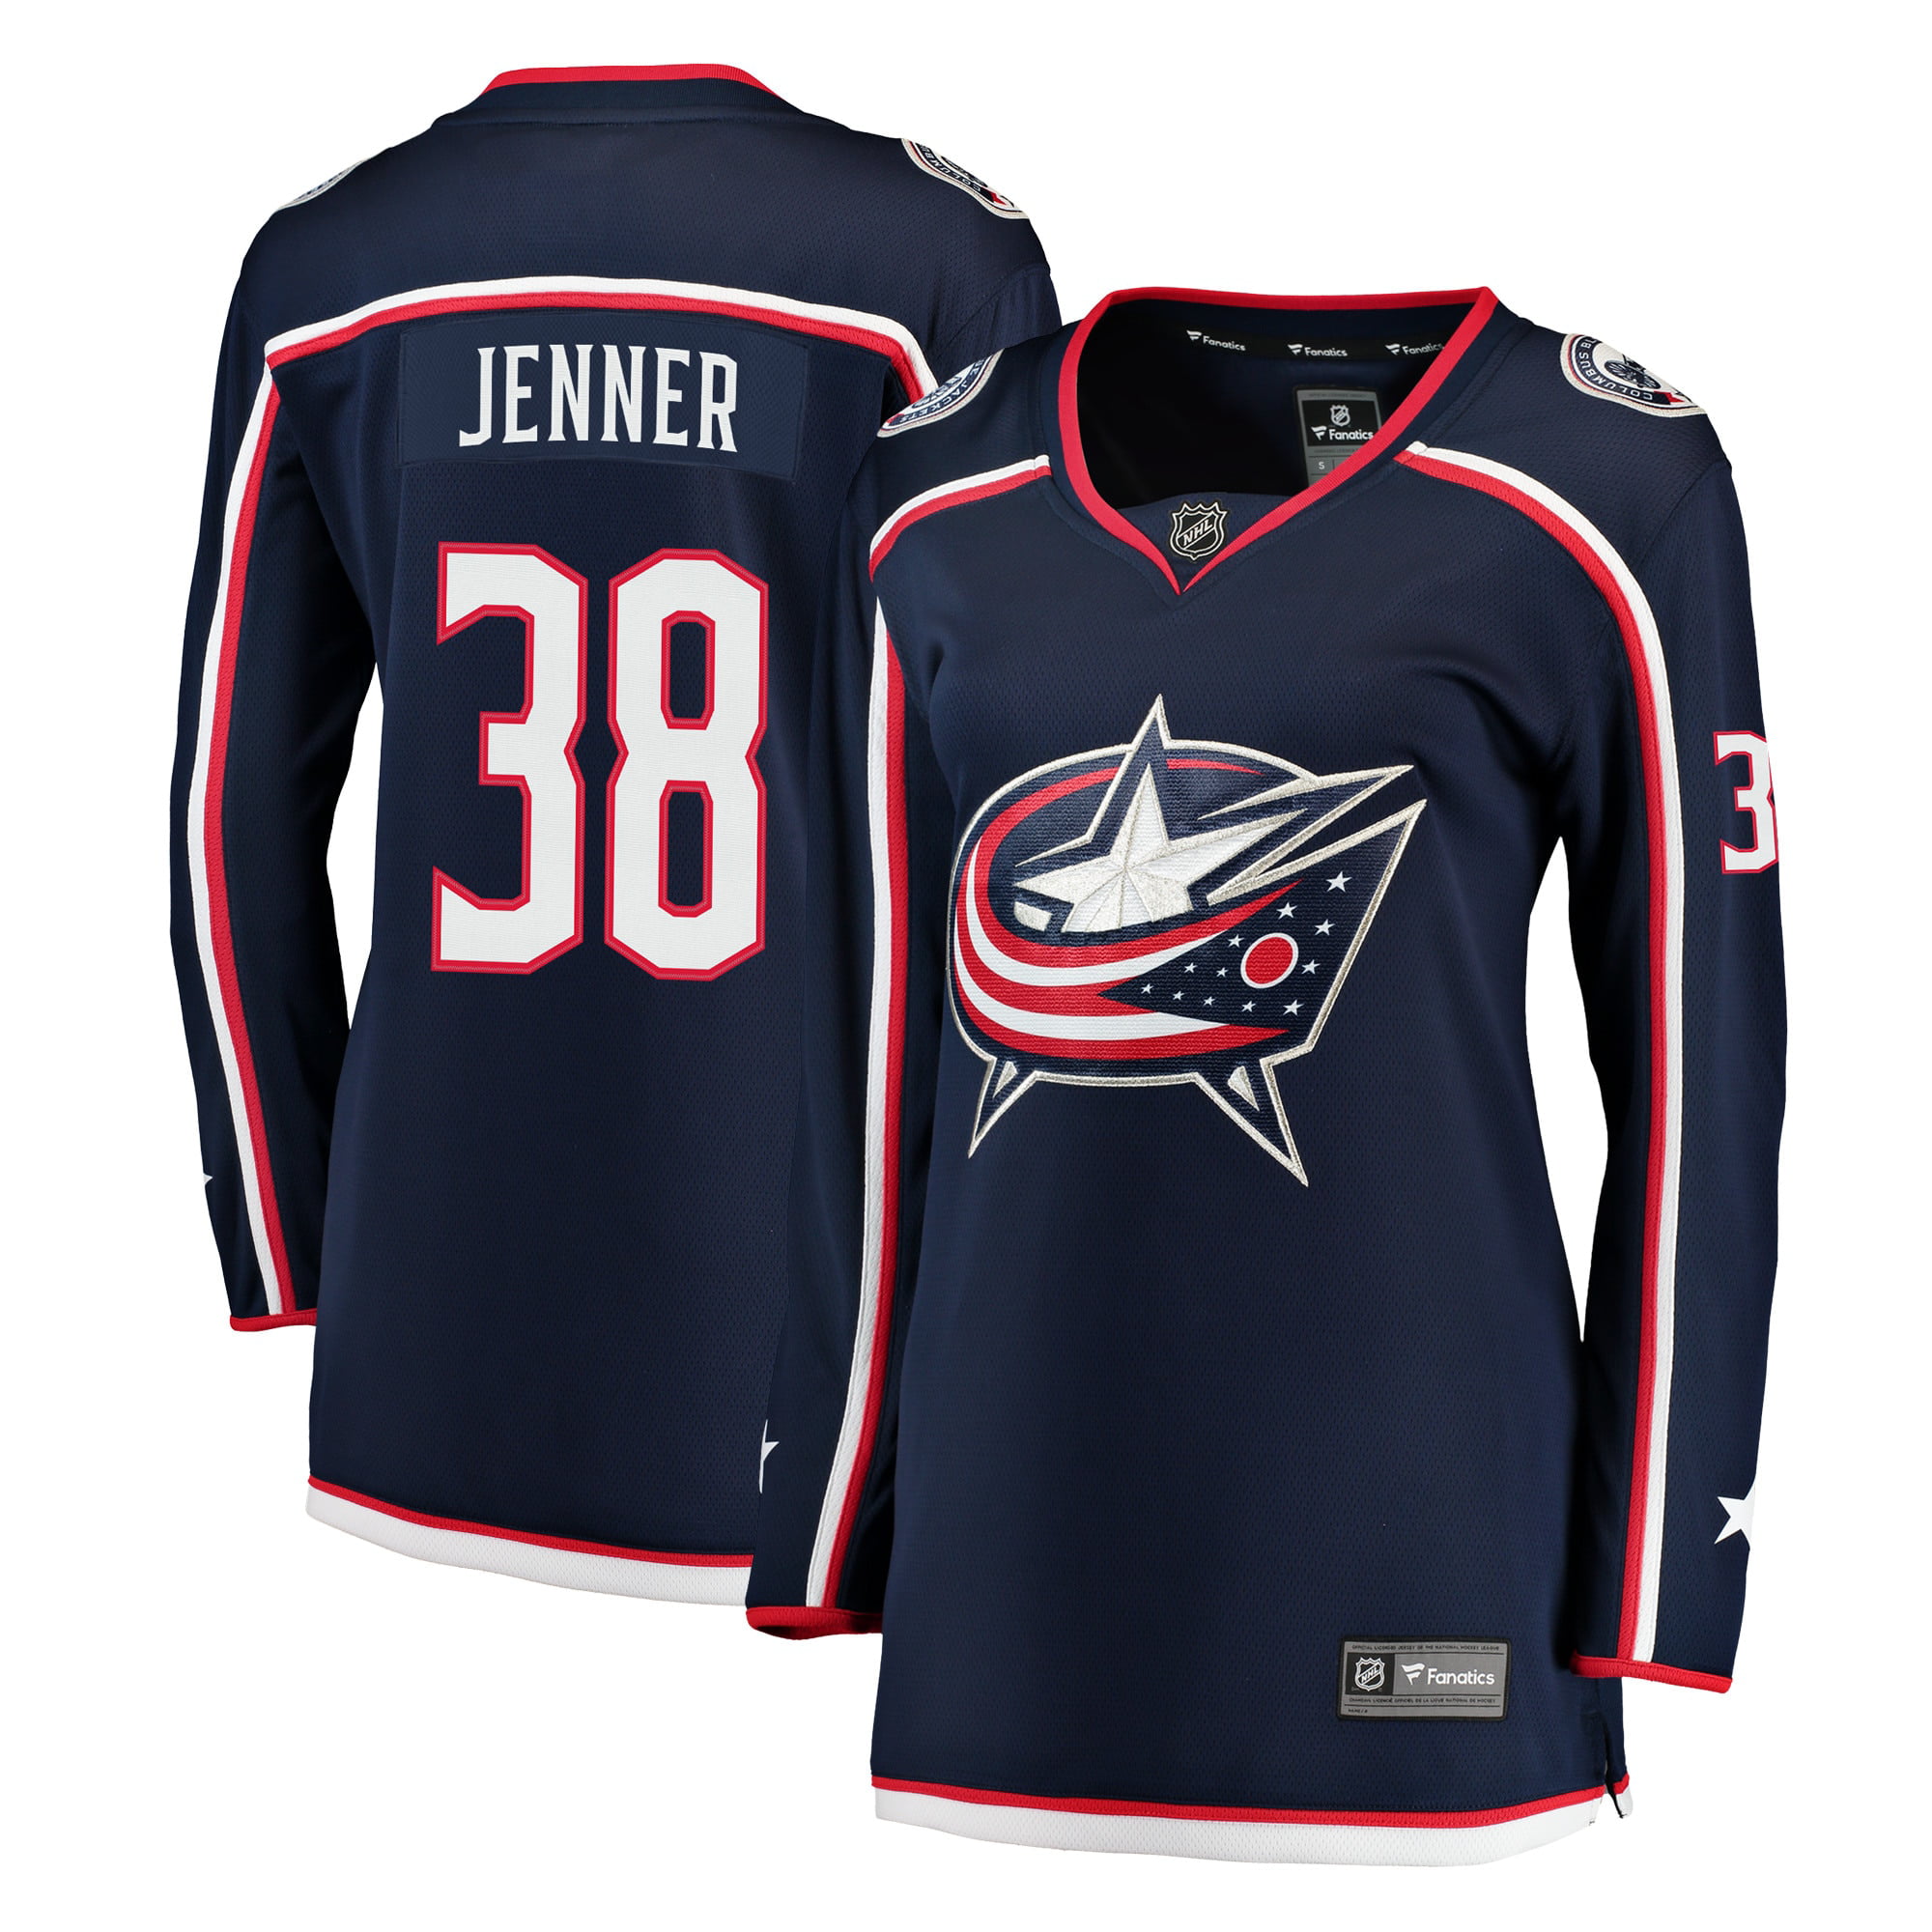 boone jenner jersey